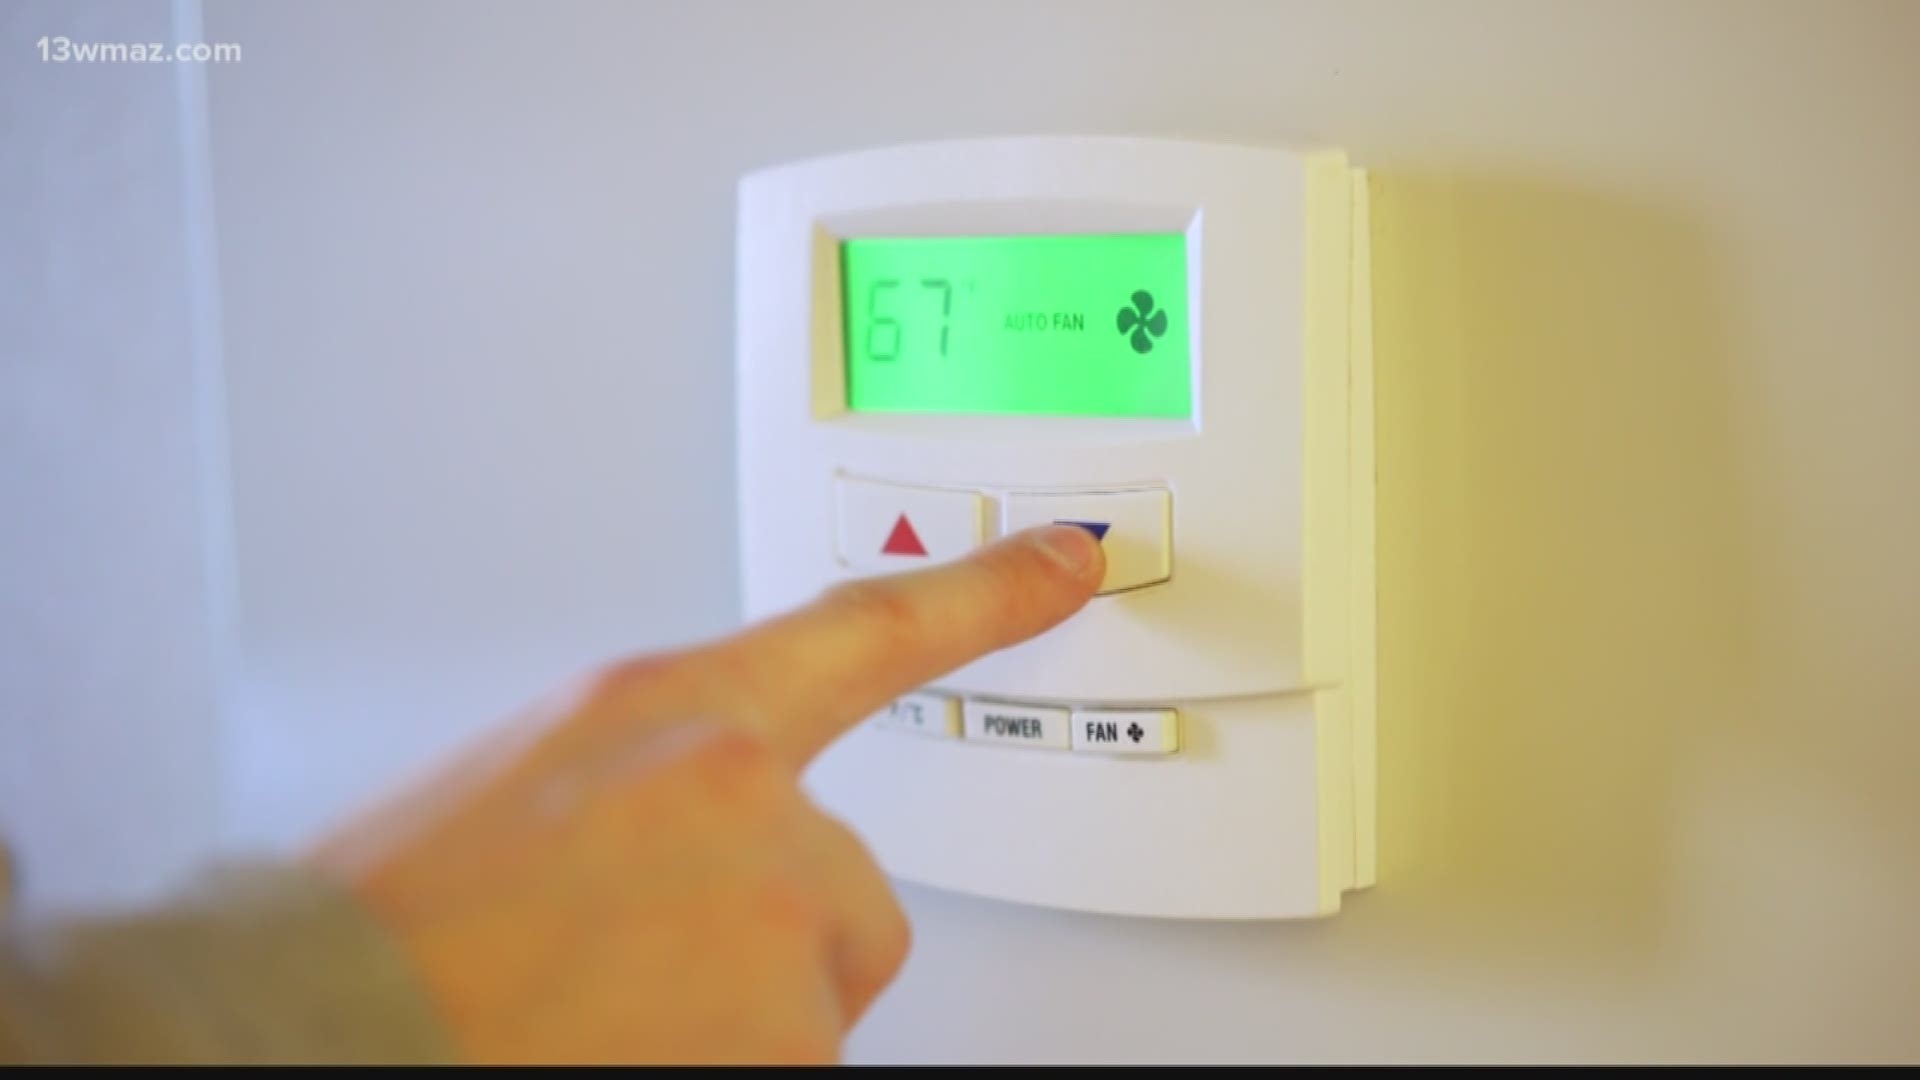 We're in the middle of a near-record run of heat for May, but trying to keep cool now doesn't have to mean getting slammed by a high power bill later. We spoke to Georgia Power to learn how you can save money on your bill this summer.